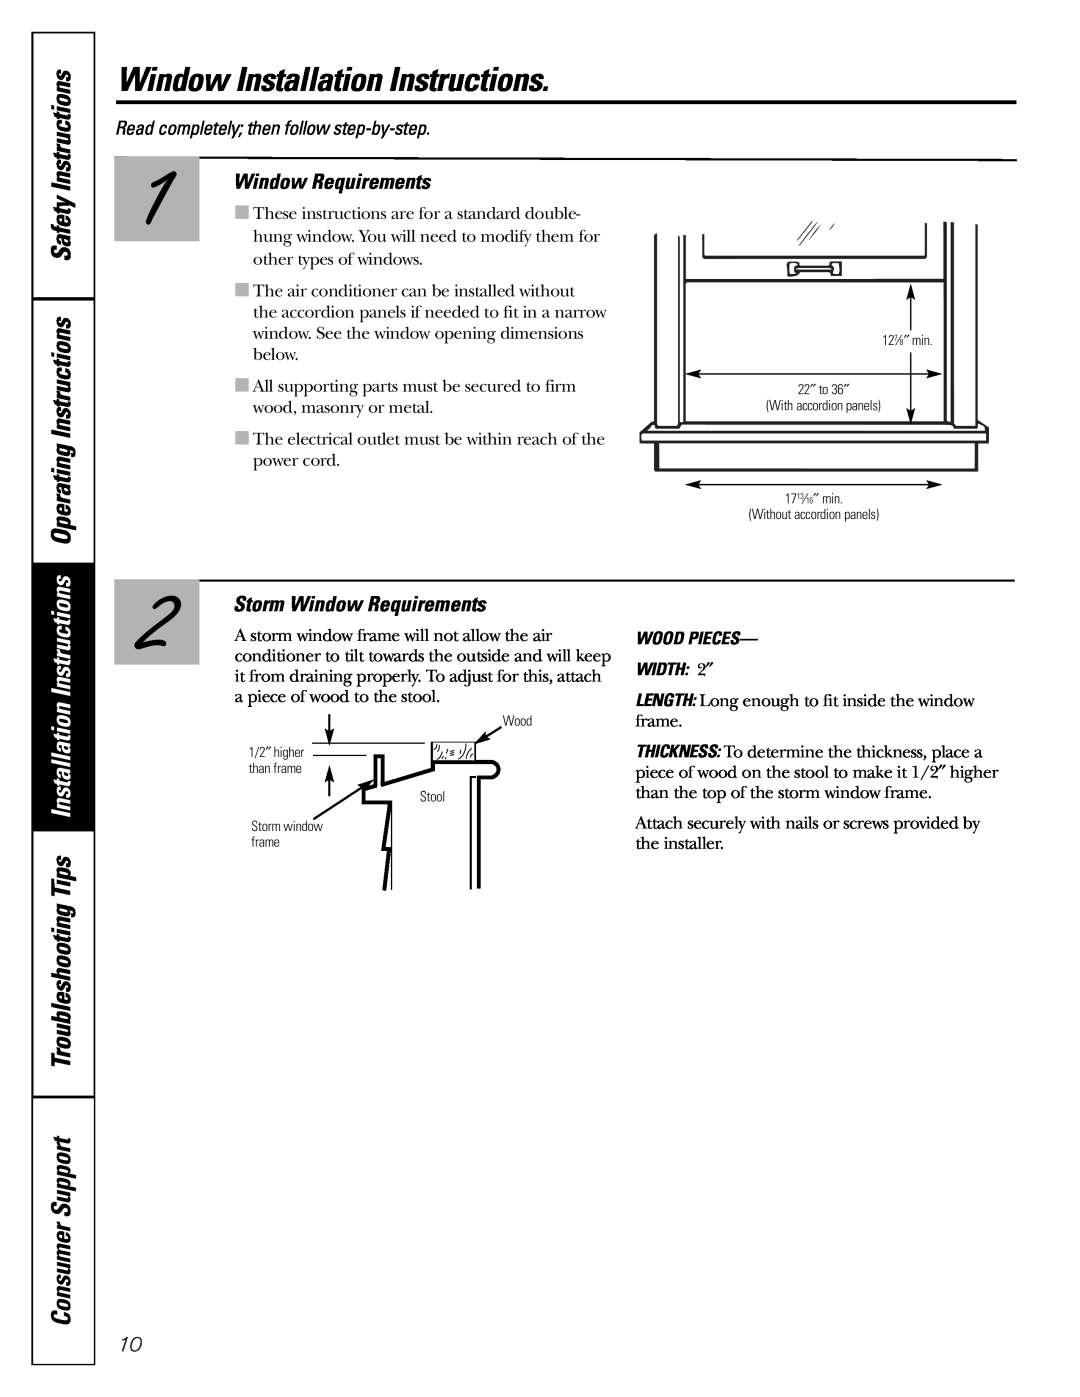 GE ASP05 owner manual Operating Instructions Safety, Storm Window Requirements, Window Installation Instructions 